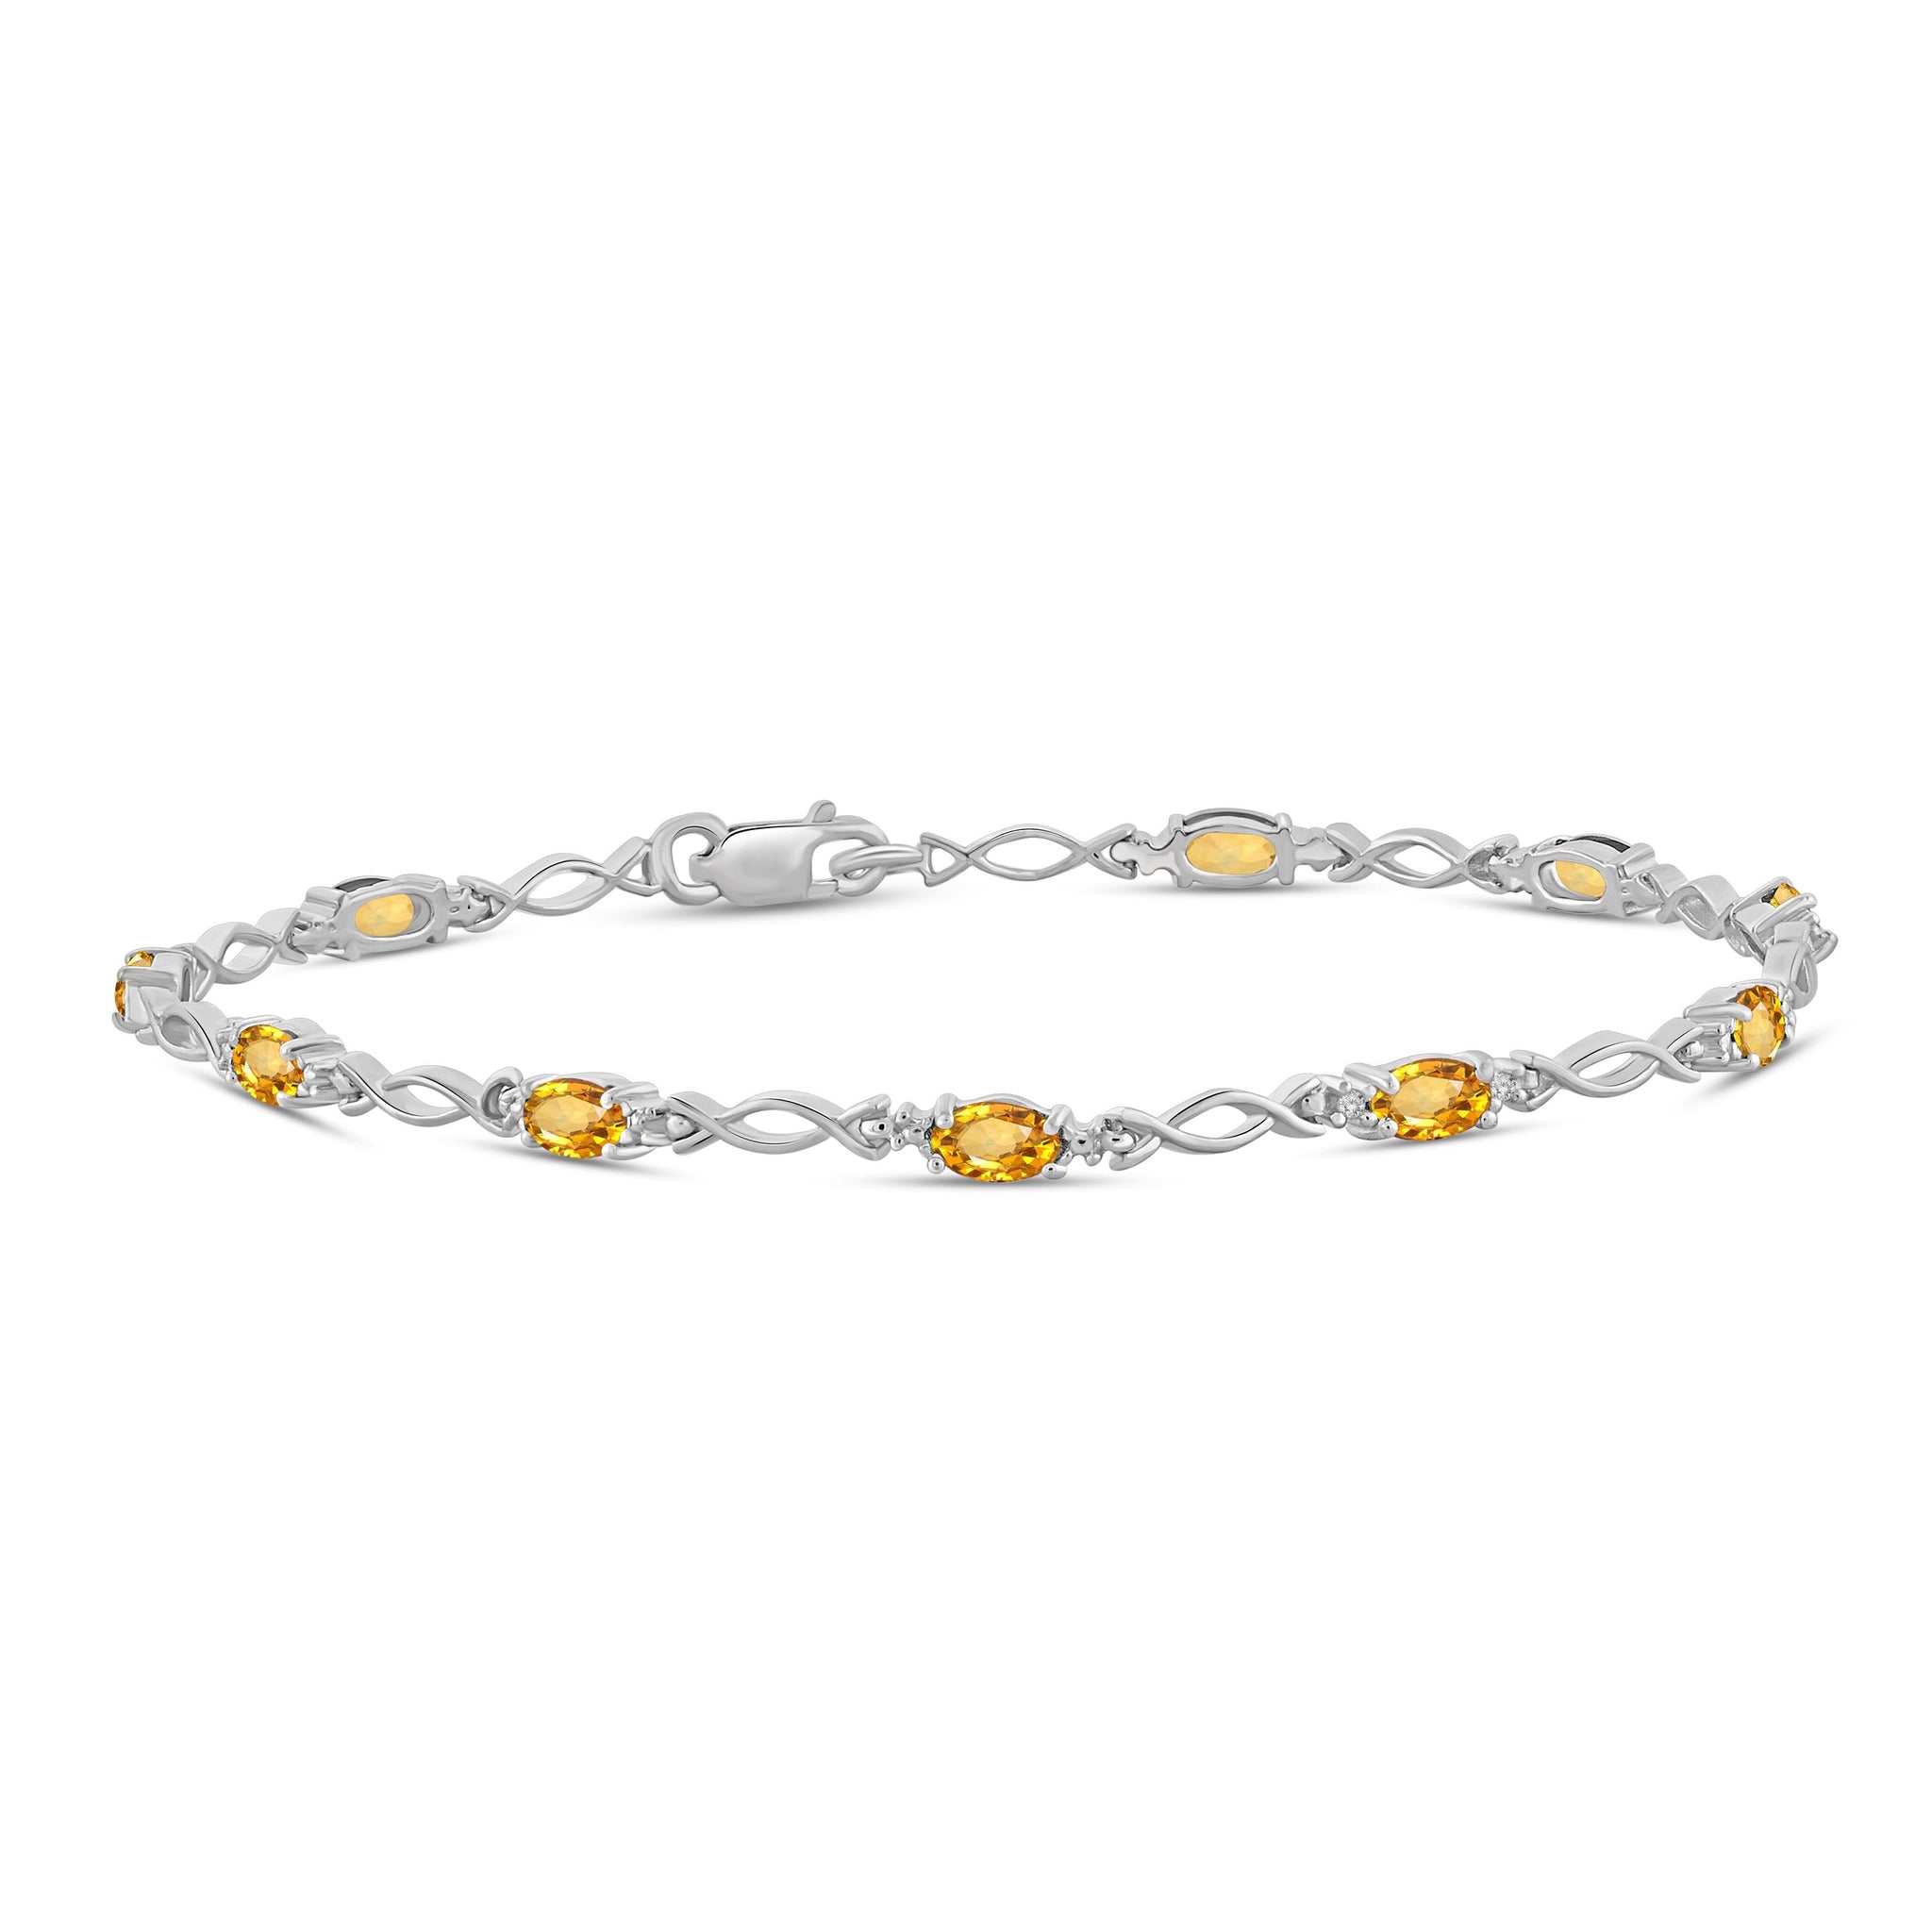 JewelonFire 2 1/5 Carat T.G.W. Citrine And White Diamond Accent Sterling Silver Bracelet - Assorted Colors